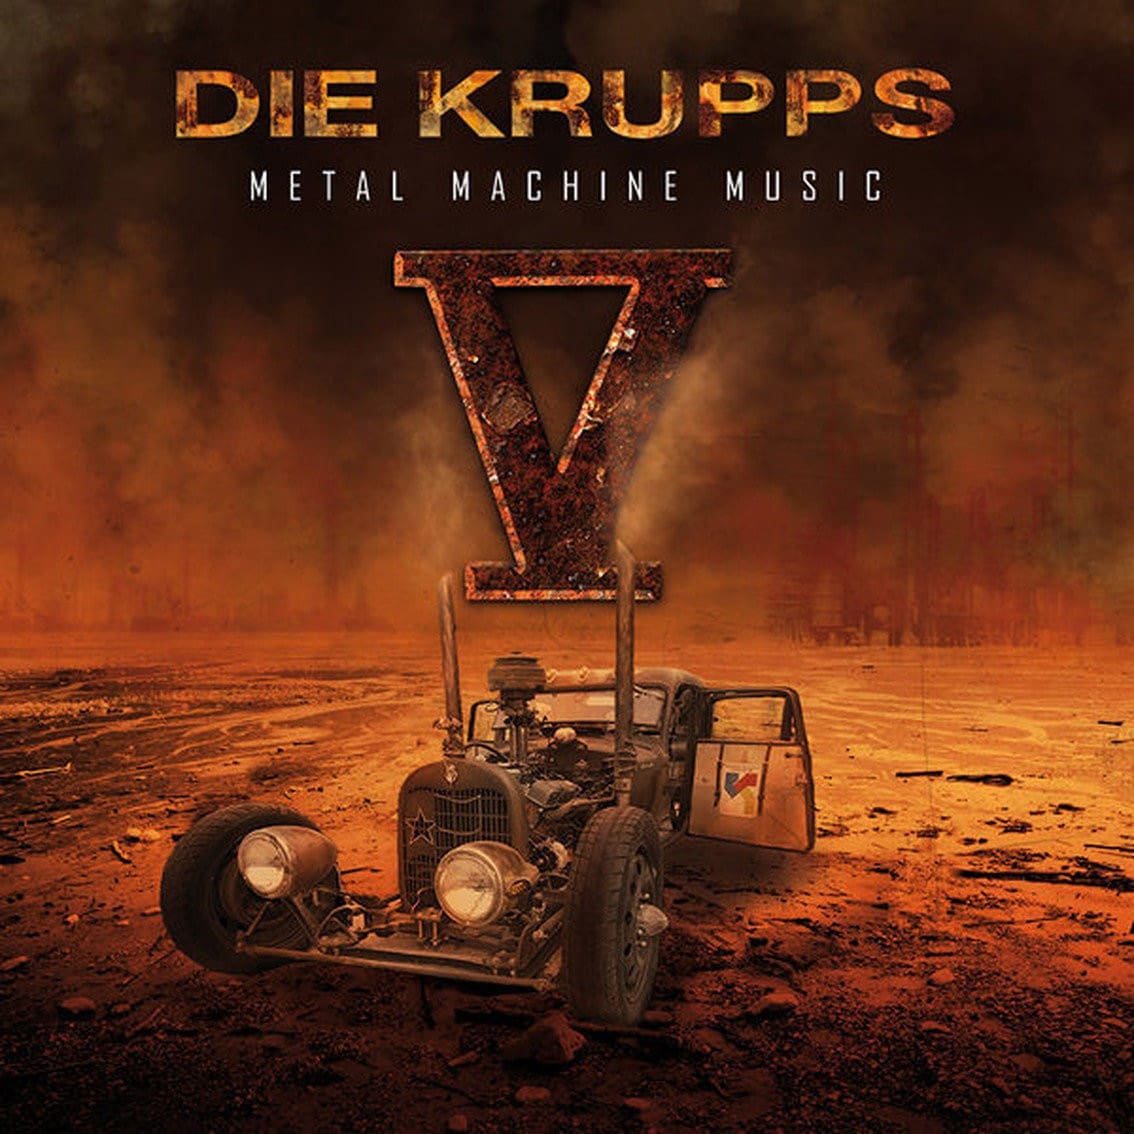 Die Krupps announce 'V: Metal Machine' 2CD album for September - pre-orders accepted now!